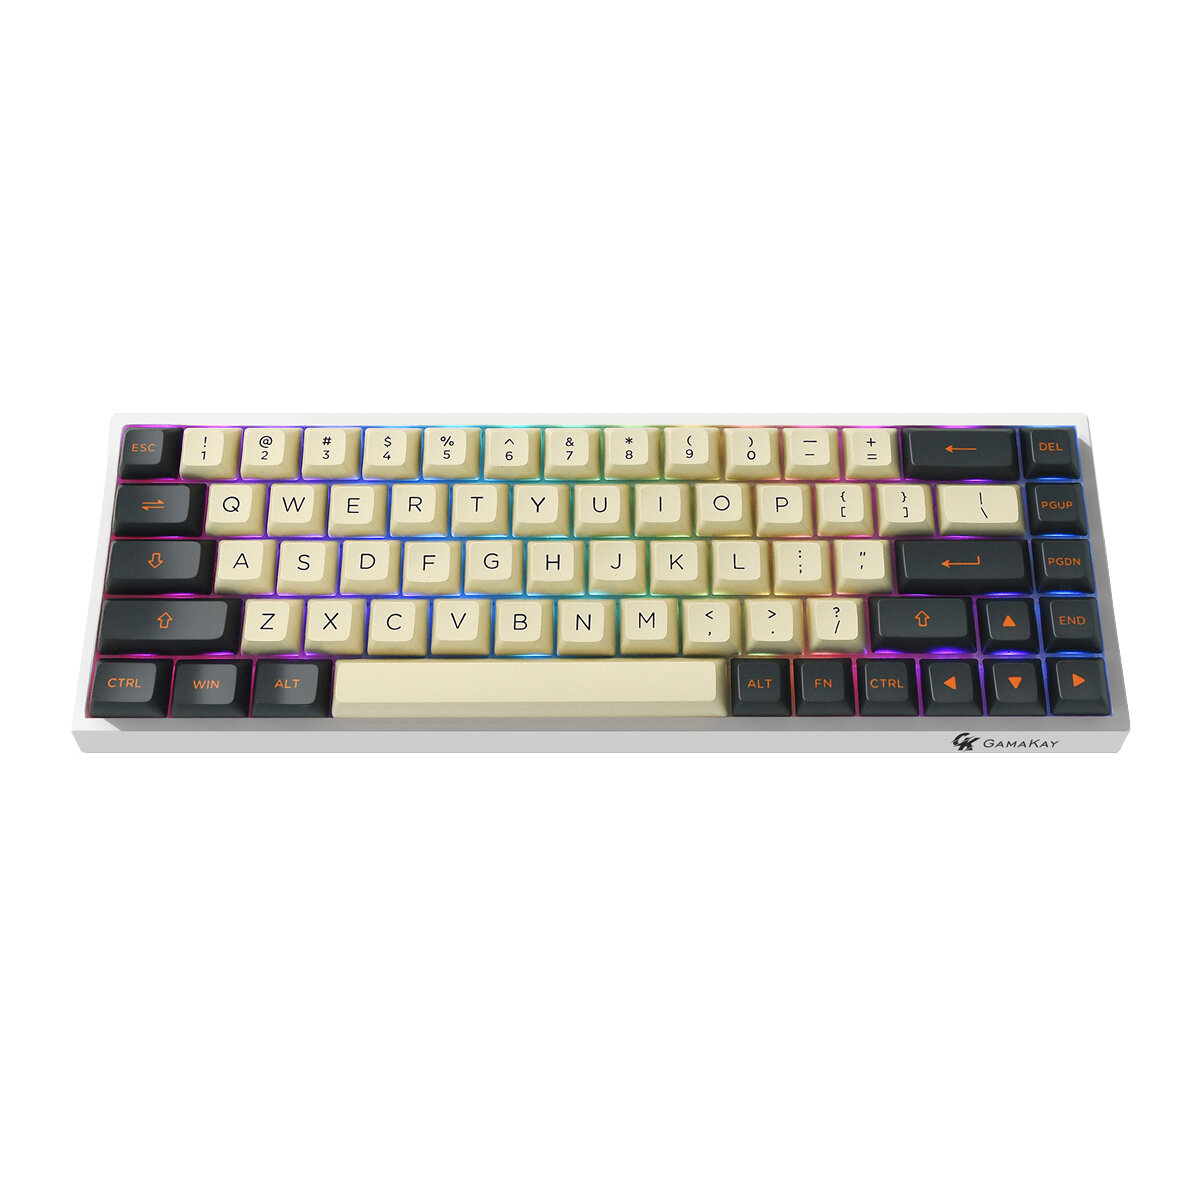 Gamakay TK68 Mechanical Keyboard 68 Keys Triple Mode Connection Wired Type-C / BT5.0 / 2.4G Wireless with Receiver Gateron Switch ASA/XDA Profile PBT Keycaps Hot Swappable RGB Gaming Keyboard